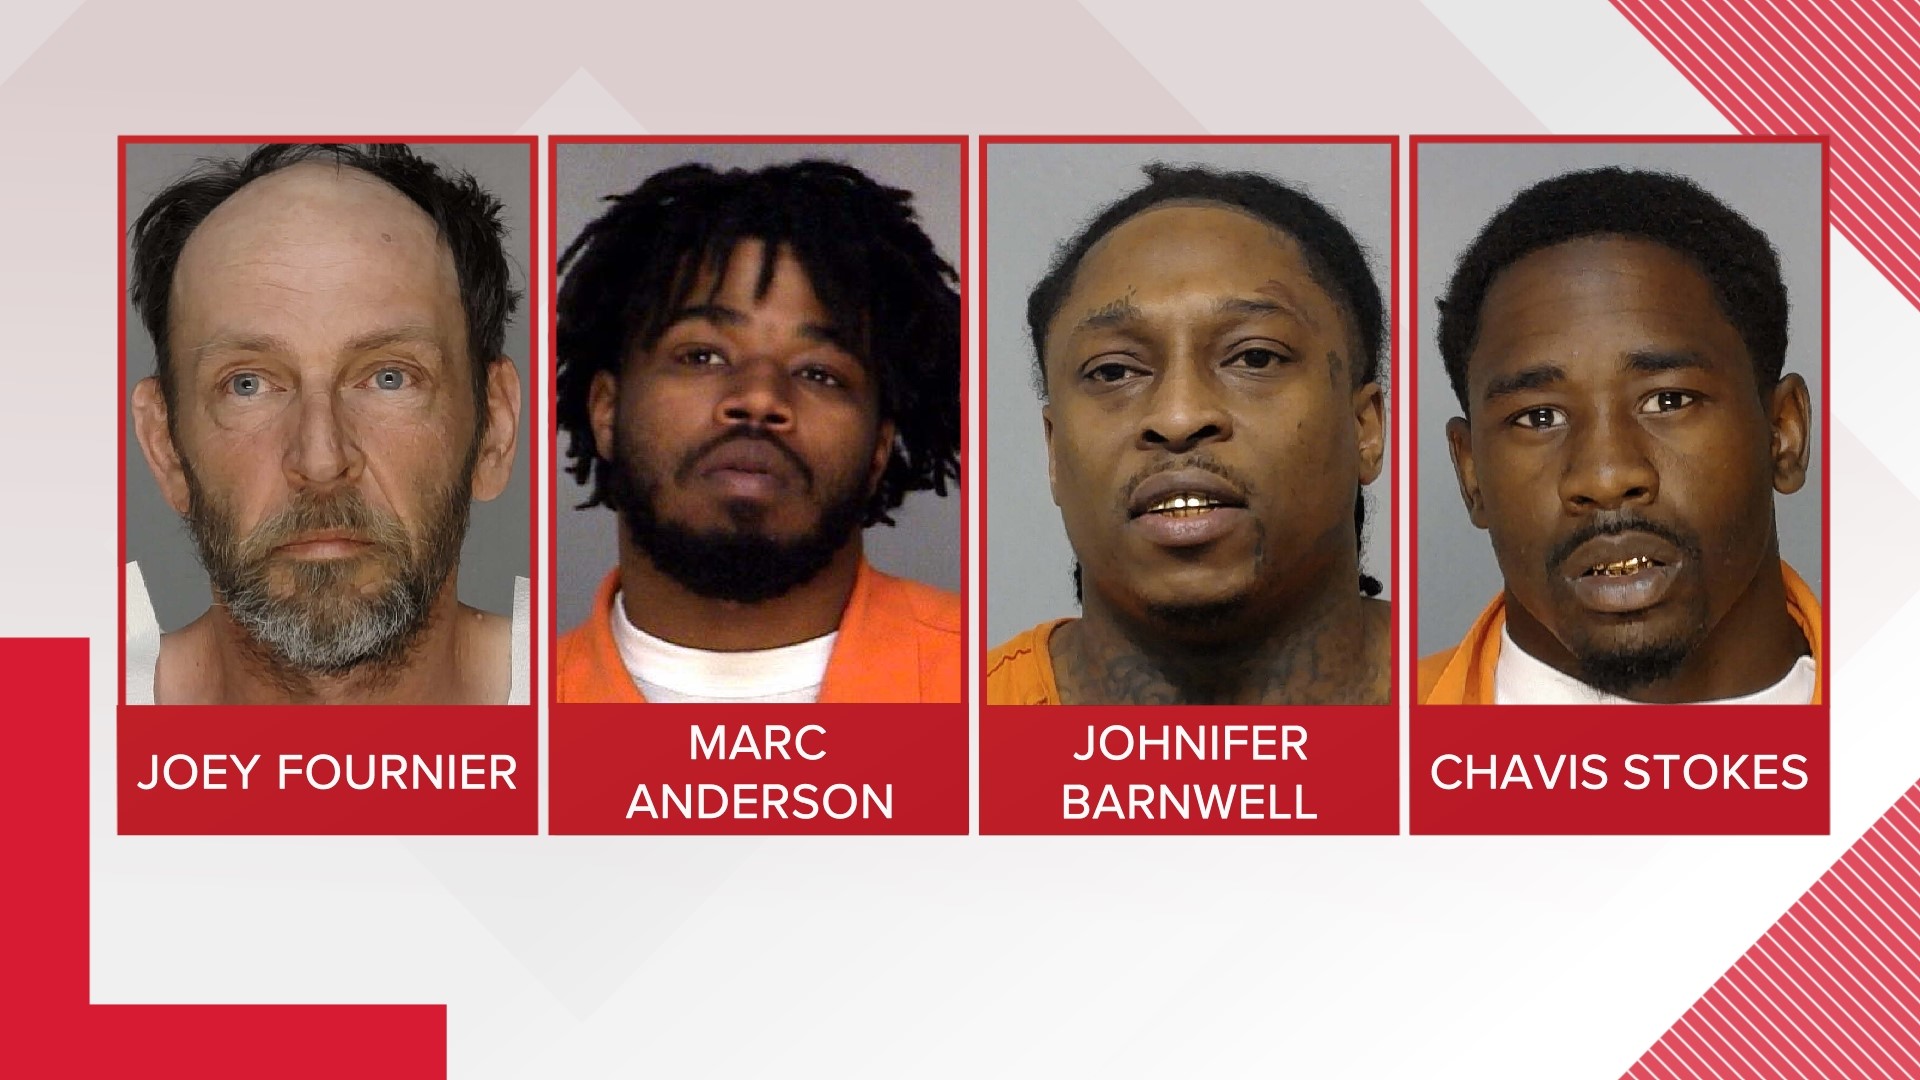 The men were in jail for things ranging from murder to federal drug charges.